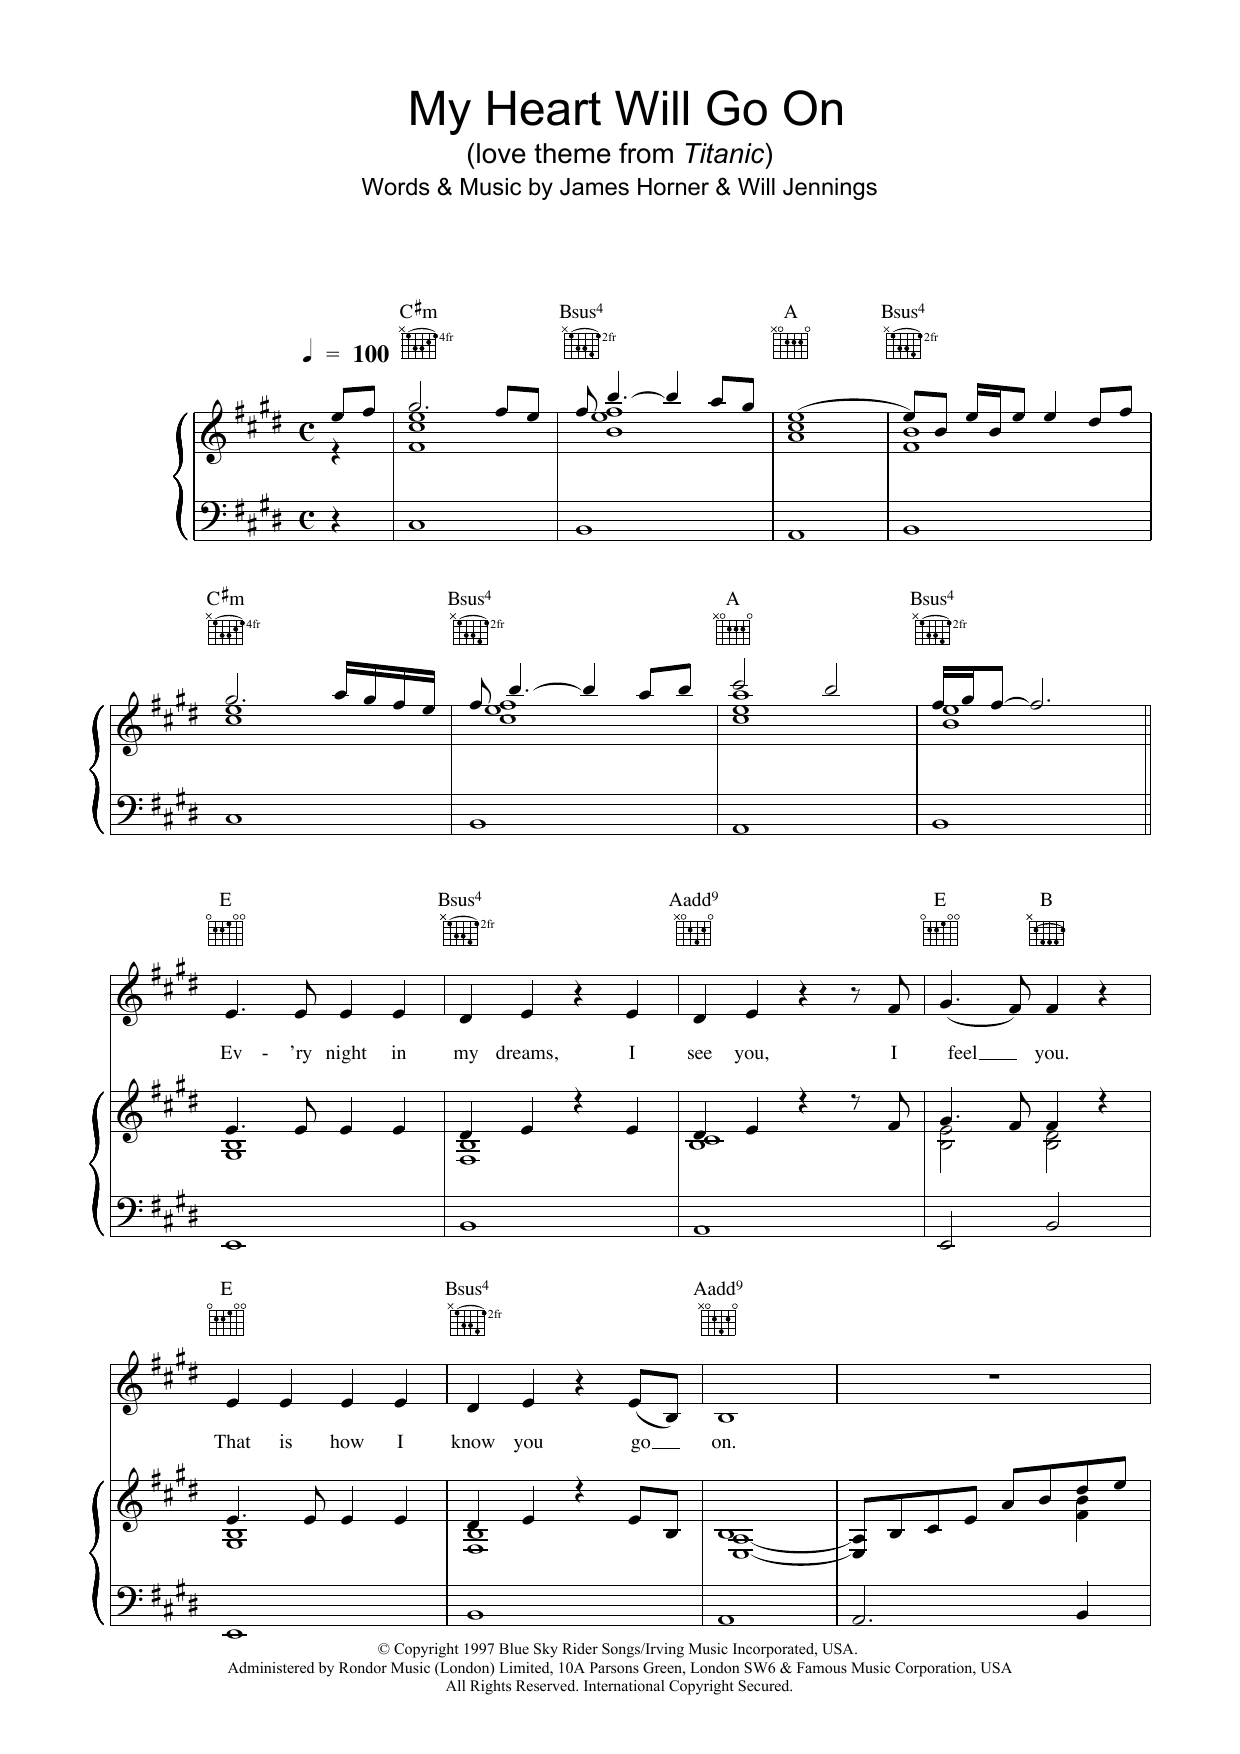 Celine Dion My Heart Will Go On (Love Theme from Titanic) sheet music notes and chords. Download Printable PDF.